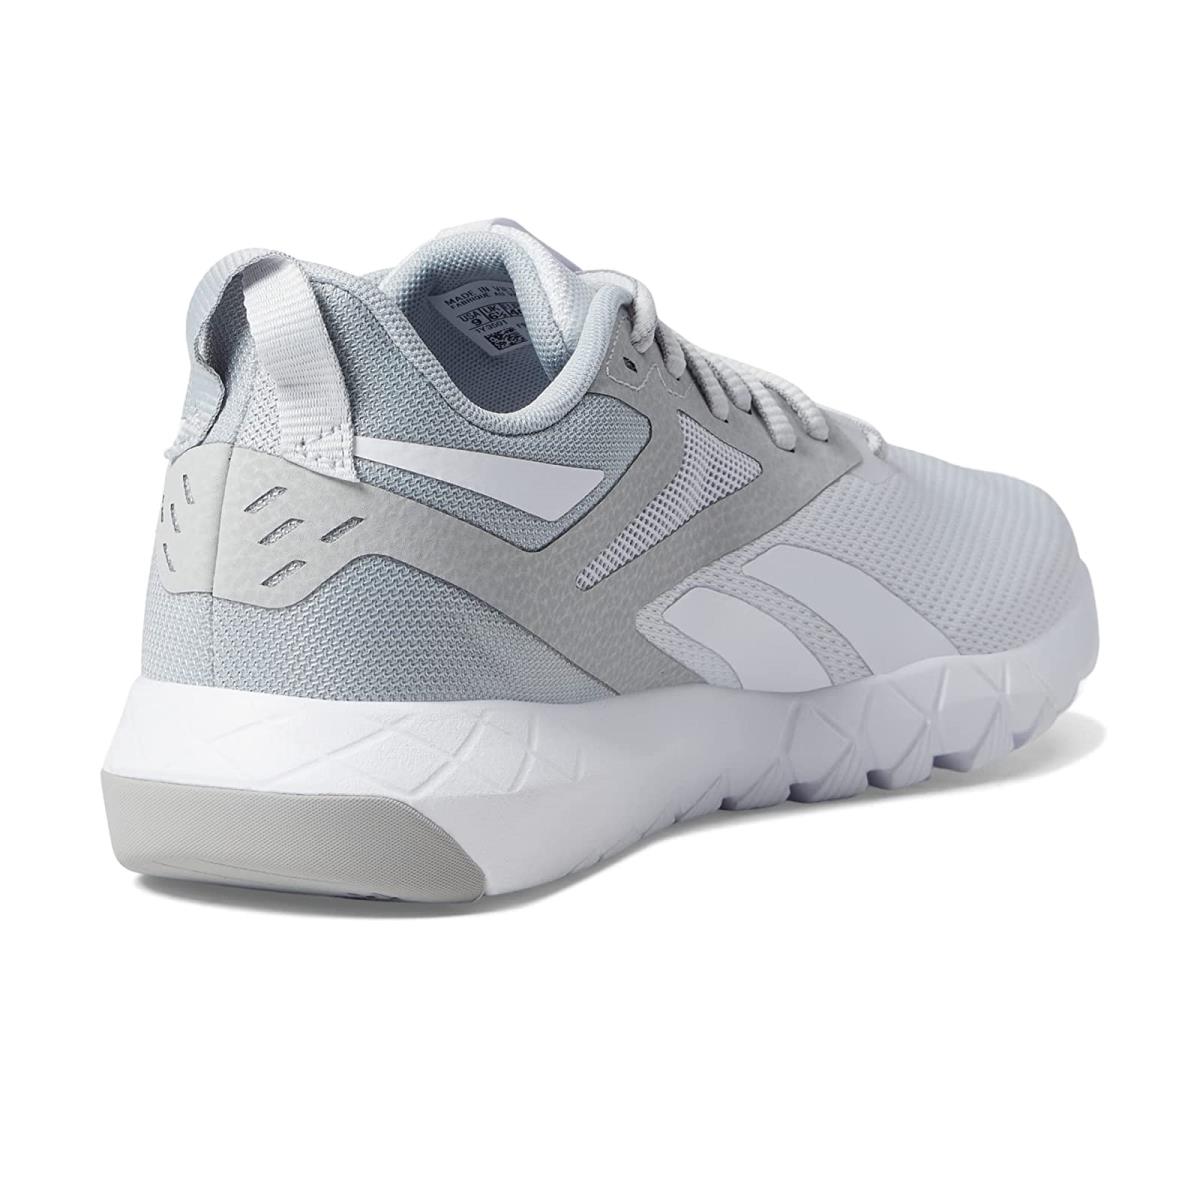 Reebok shoes  - Pure Grey/Cold Grey/White 3